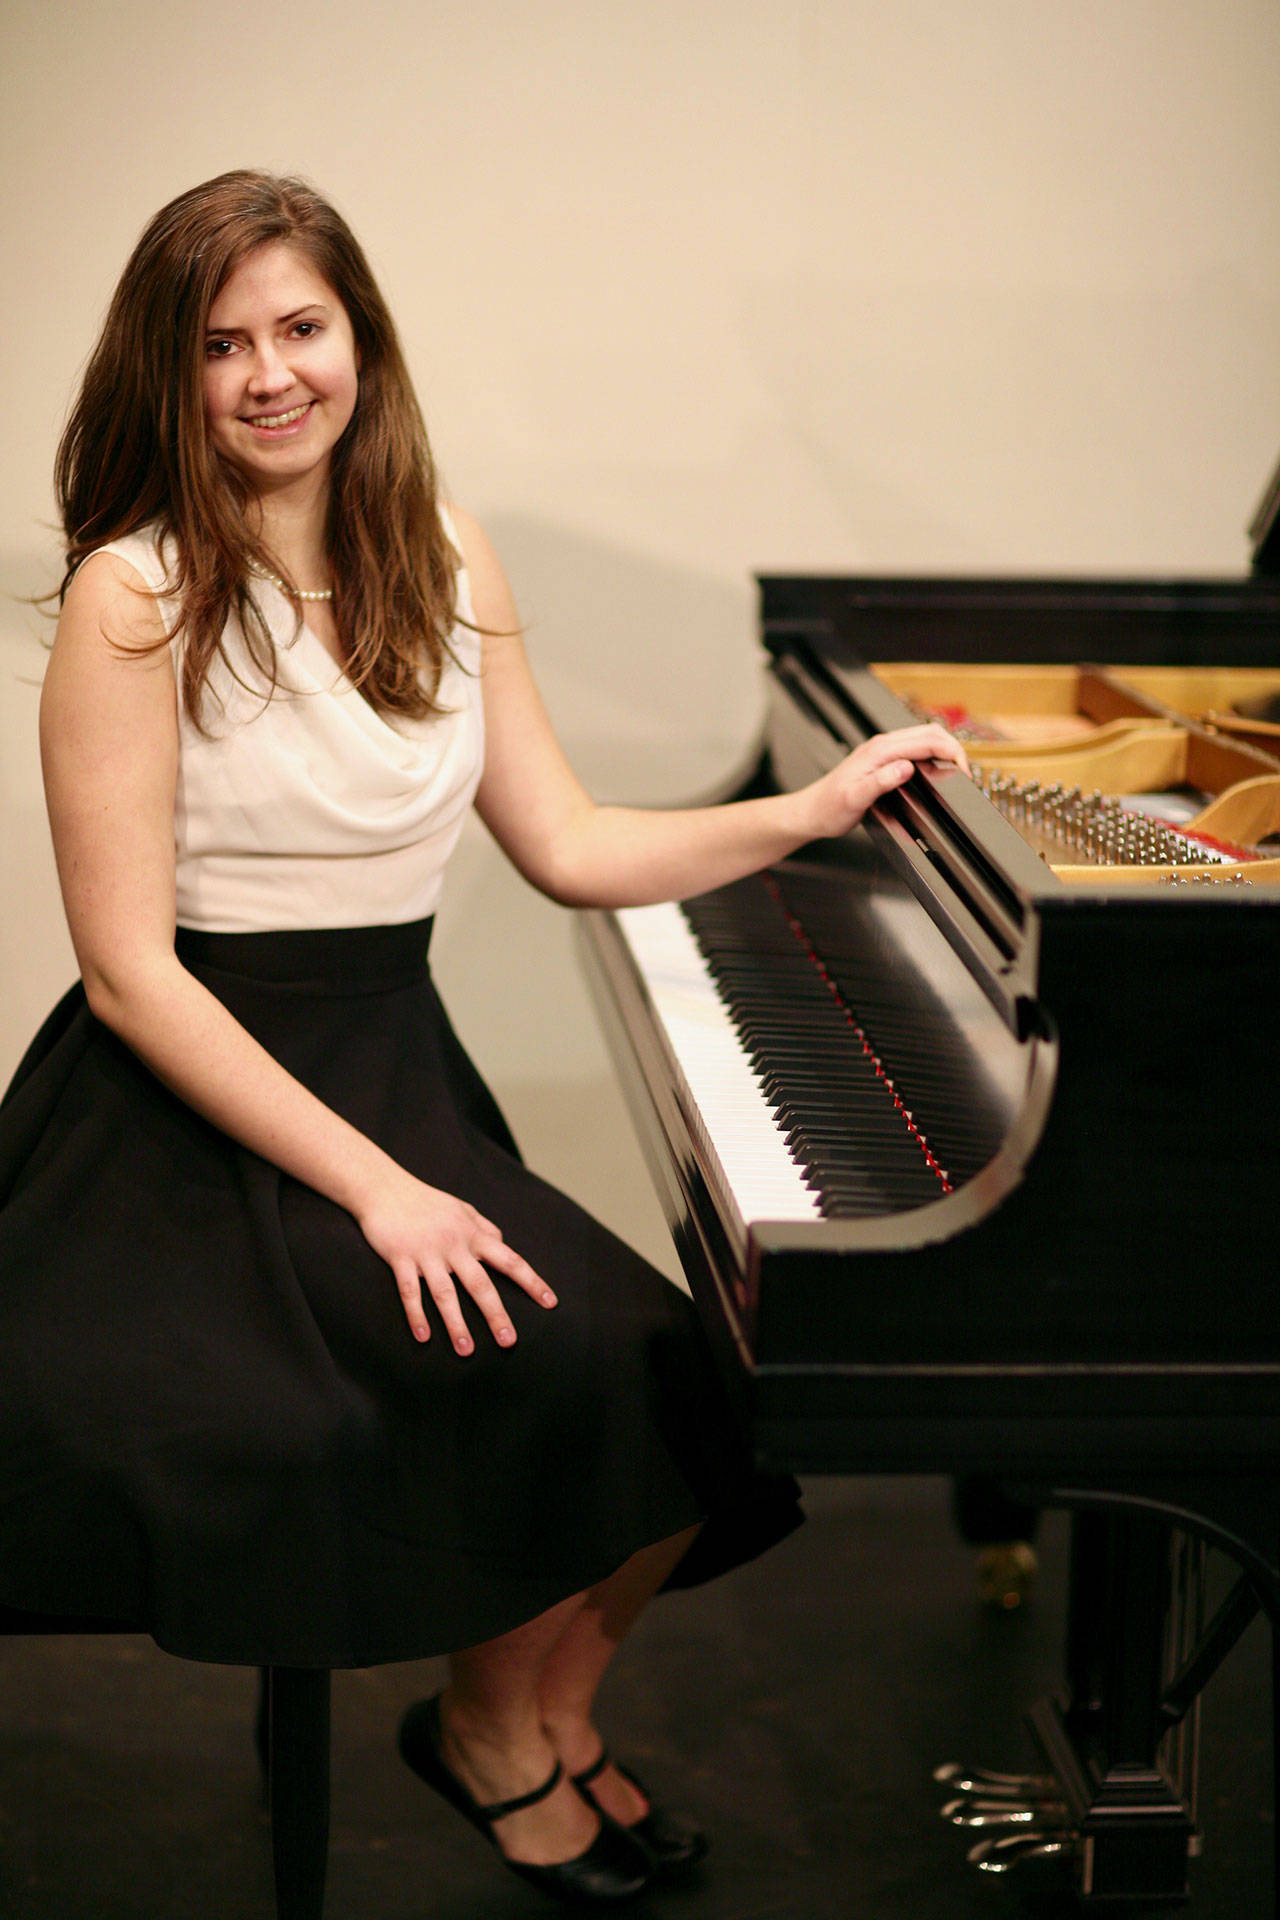 Heidi Fivash, a classical pianist and soprano, performs at 1 p.m. Tuesday at St. Luke’s Episcopal Church’s Music Live at One.